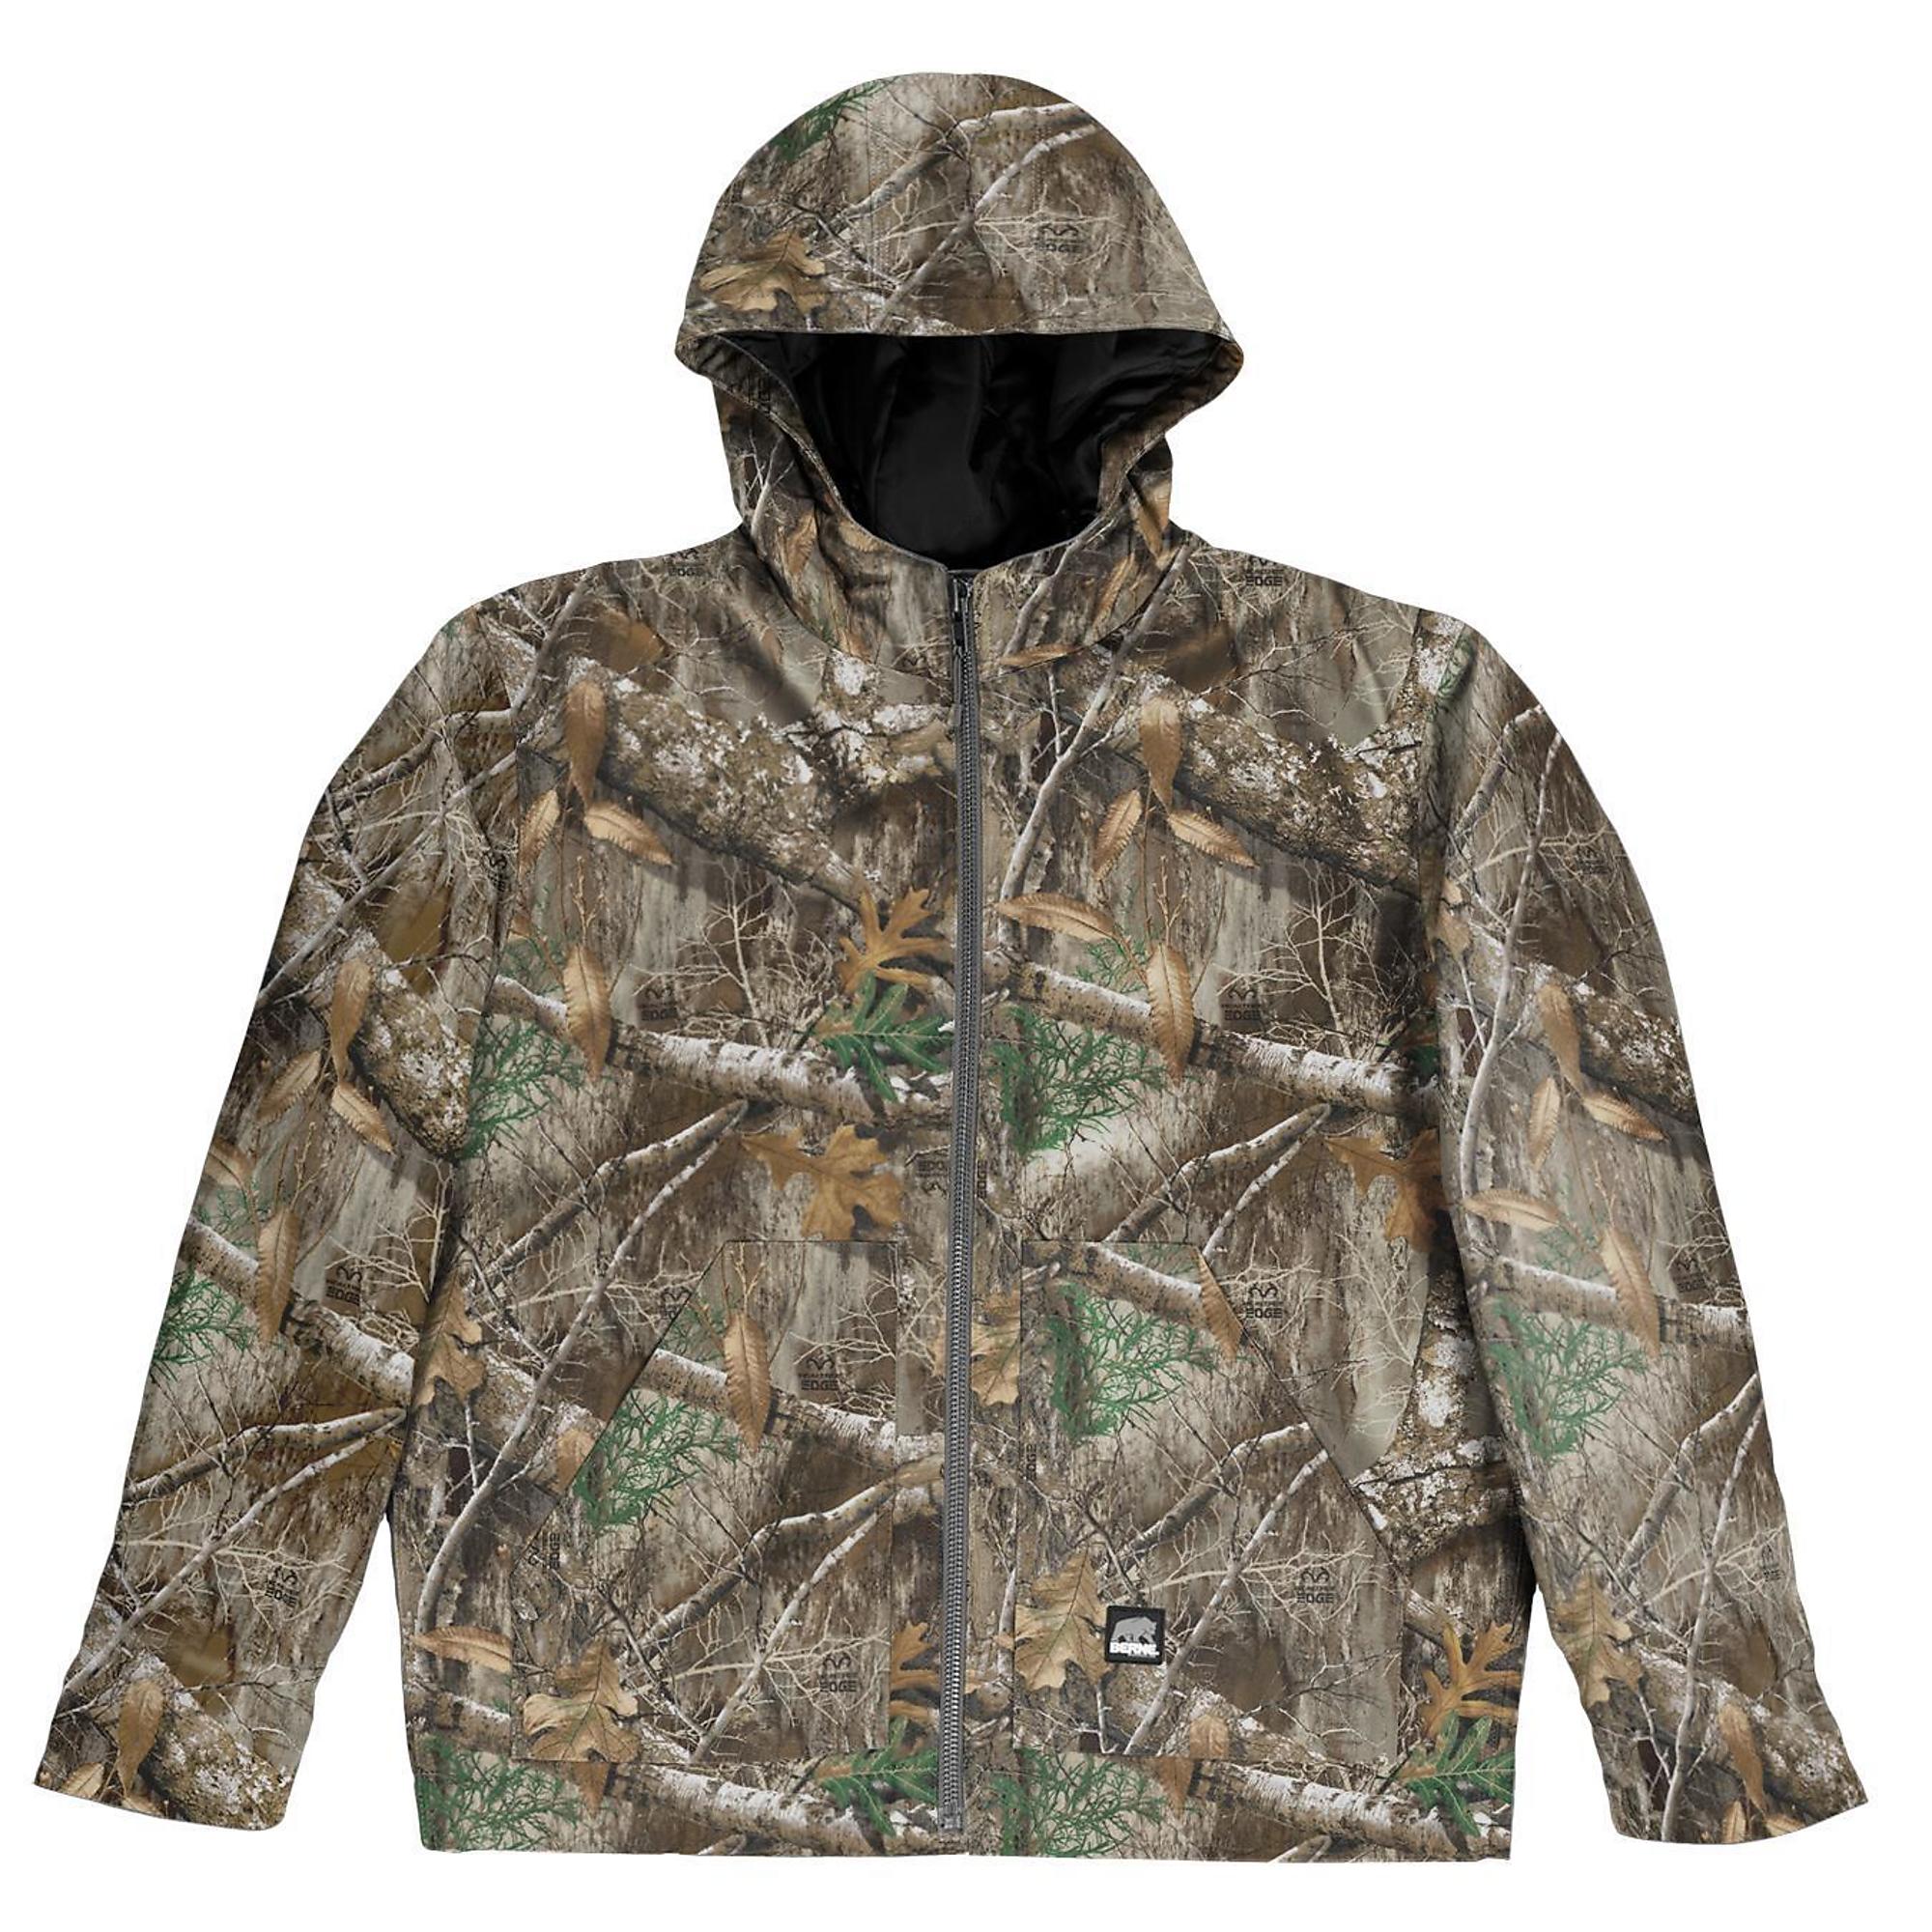 Tough Duck Women's Quilted Jacket